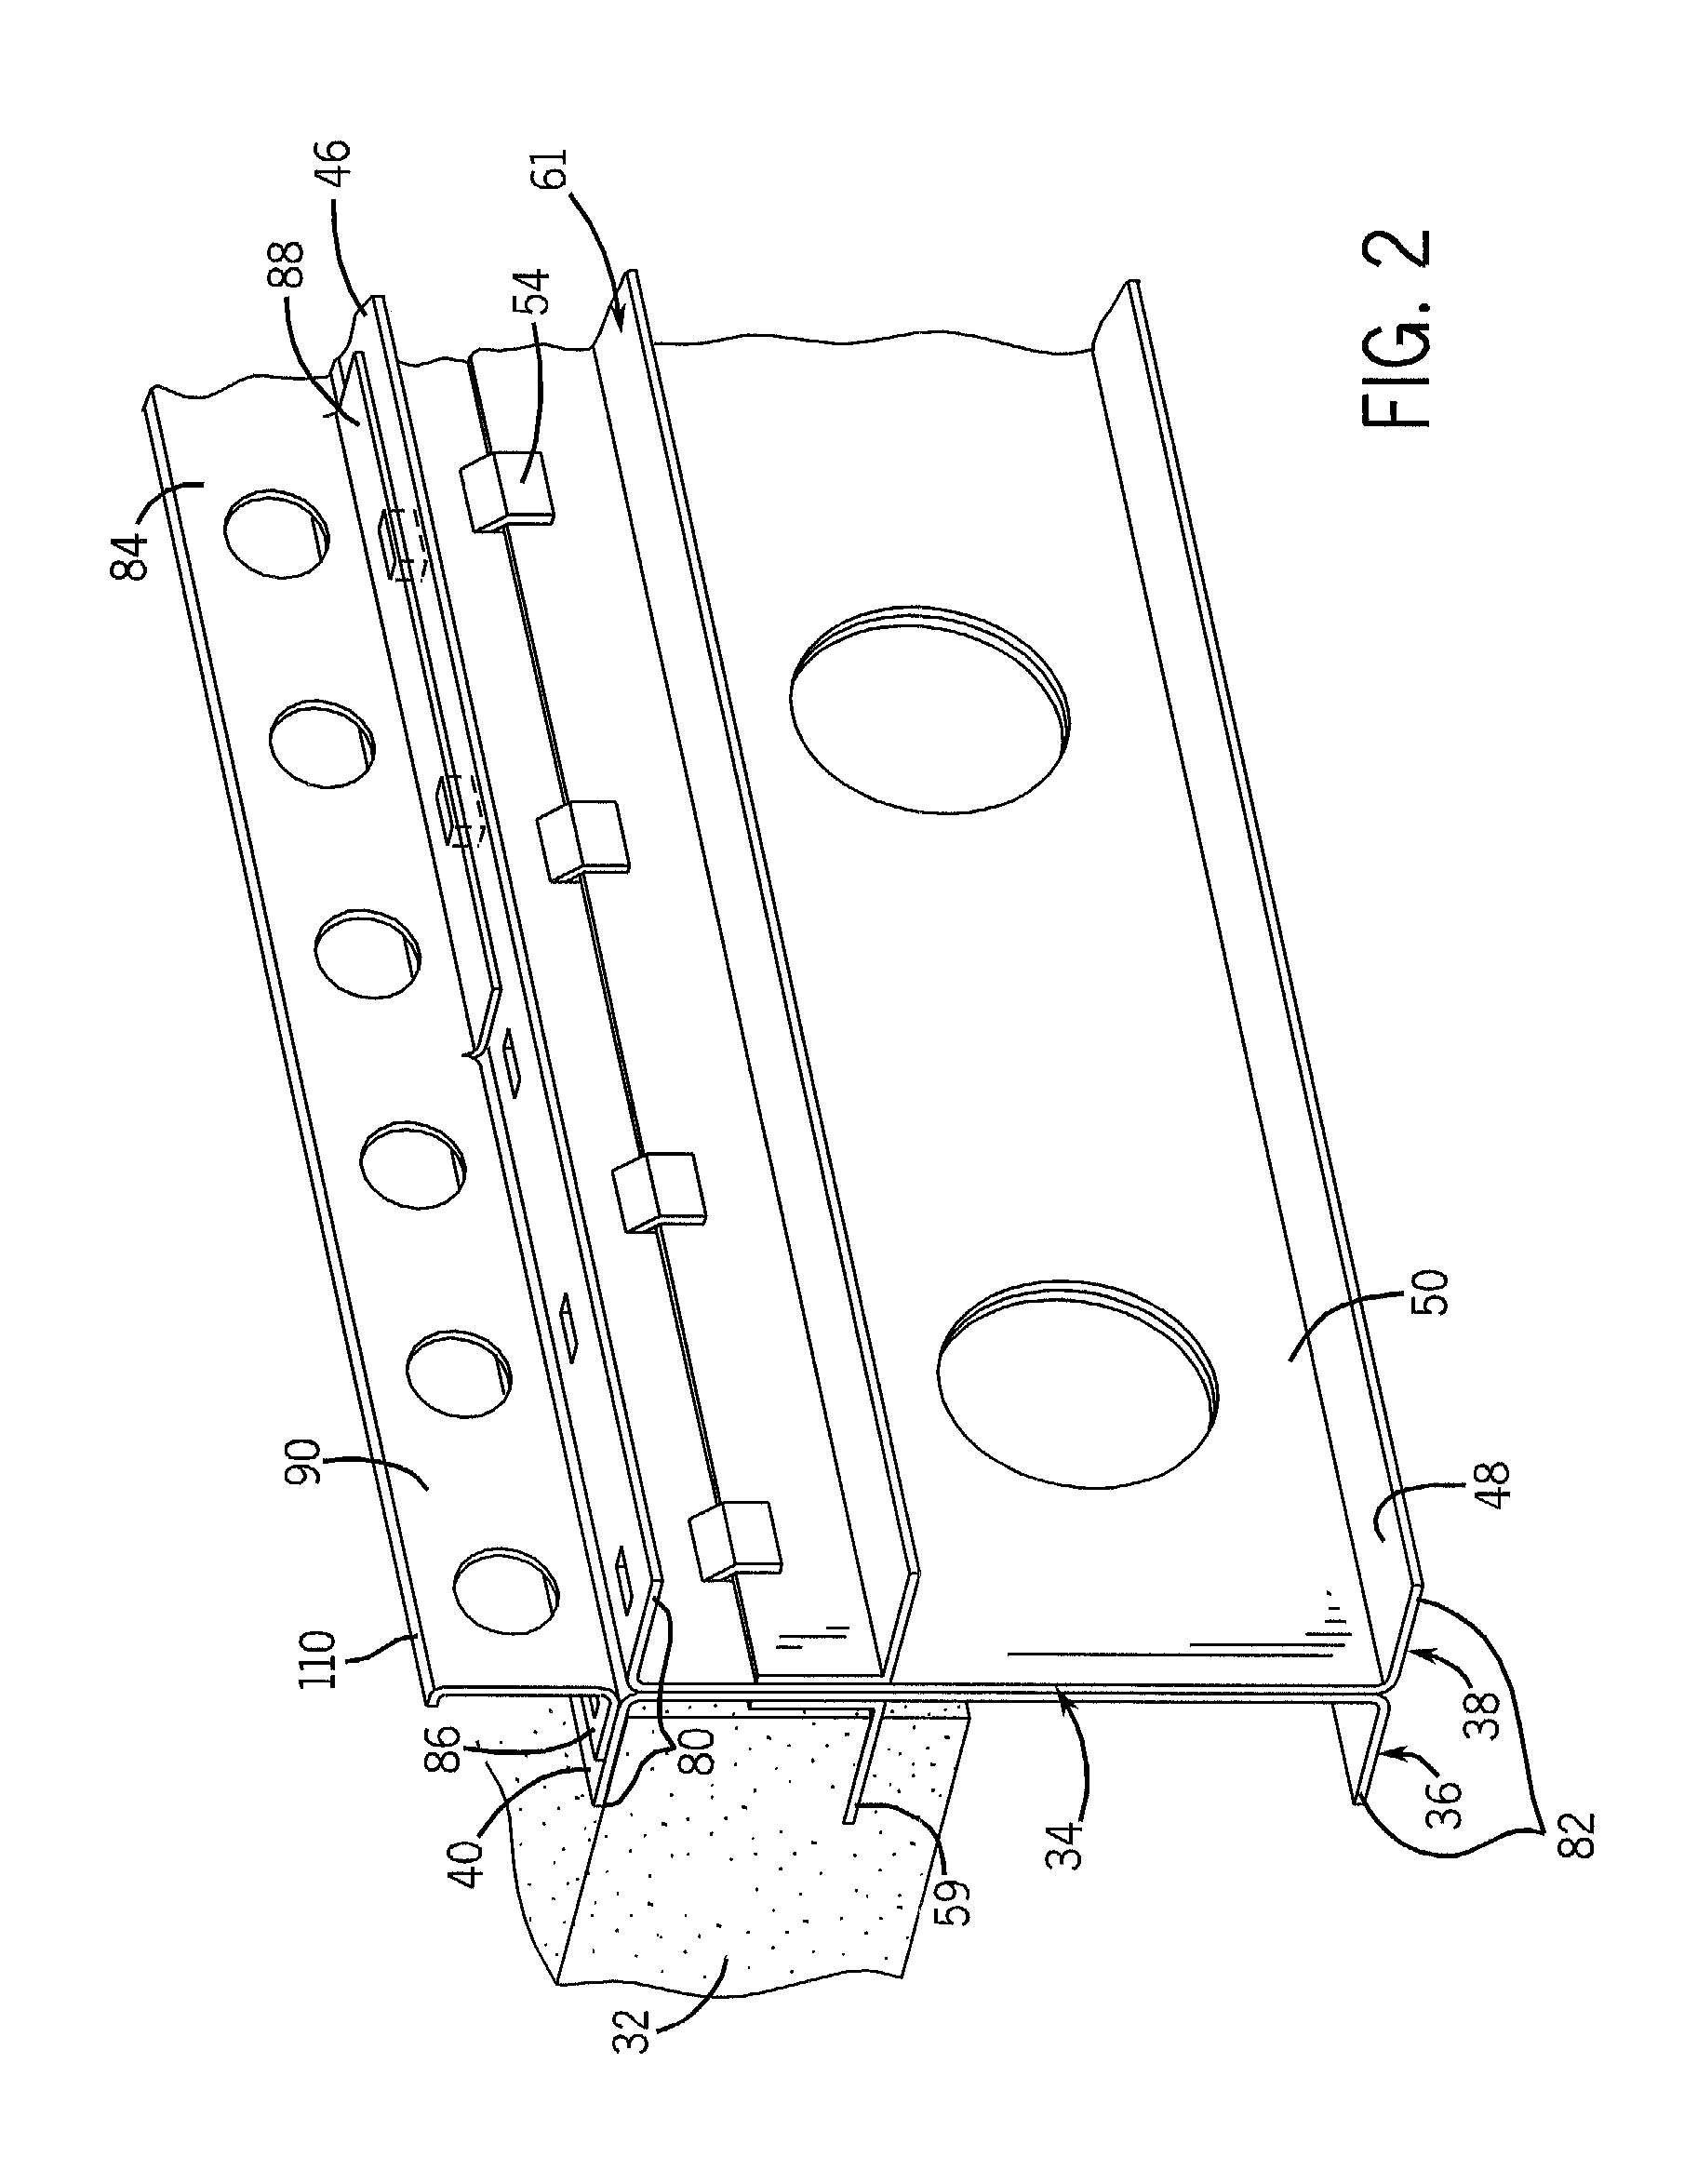 Composite floor systems and apparatus for supporting a concrete floor